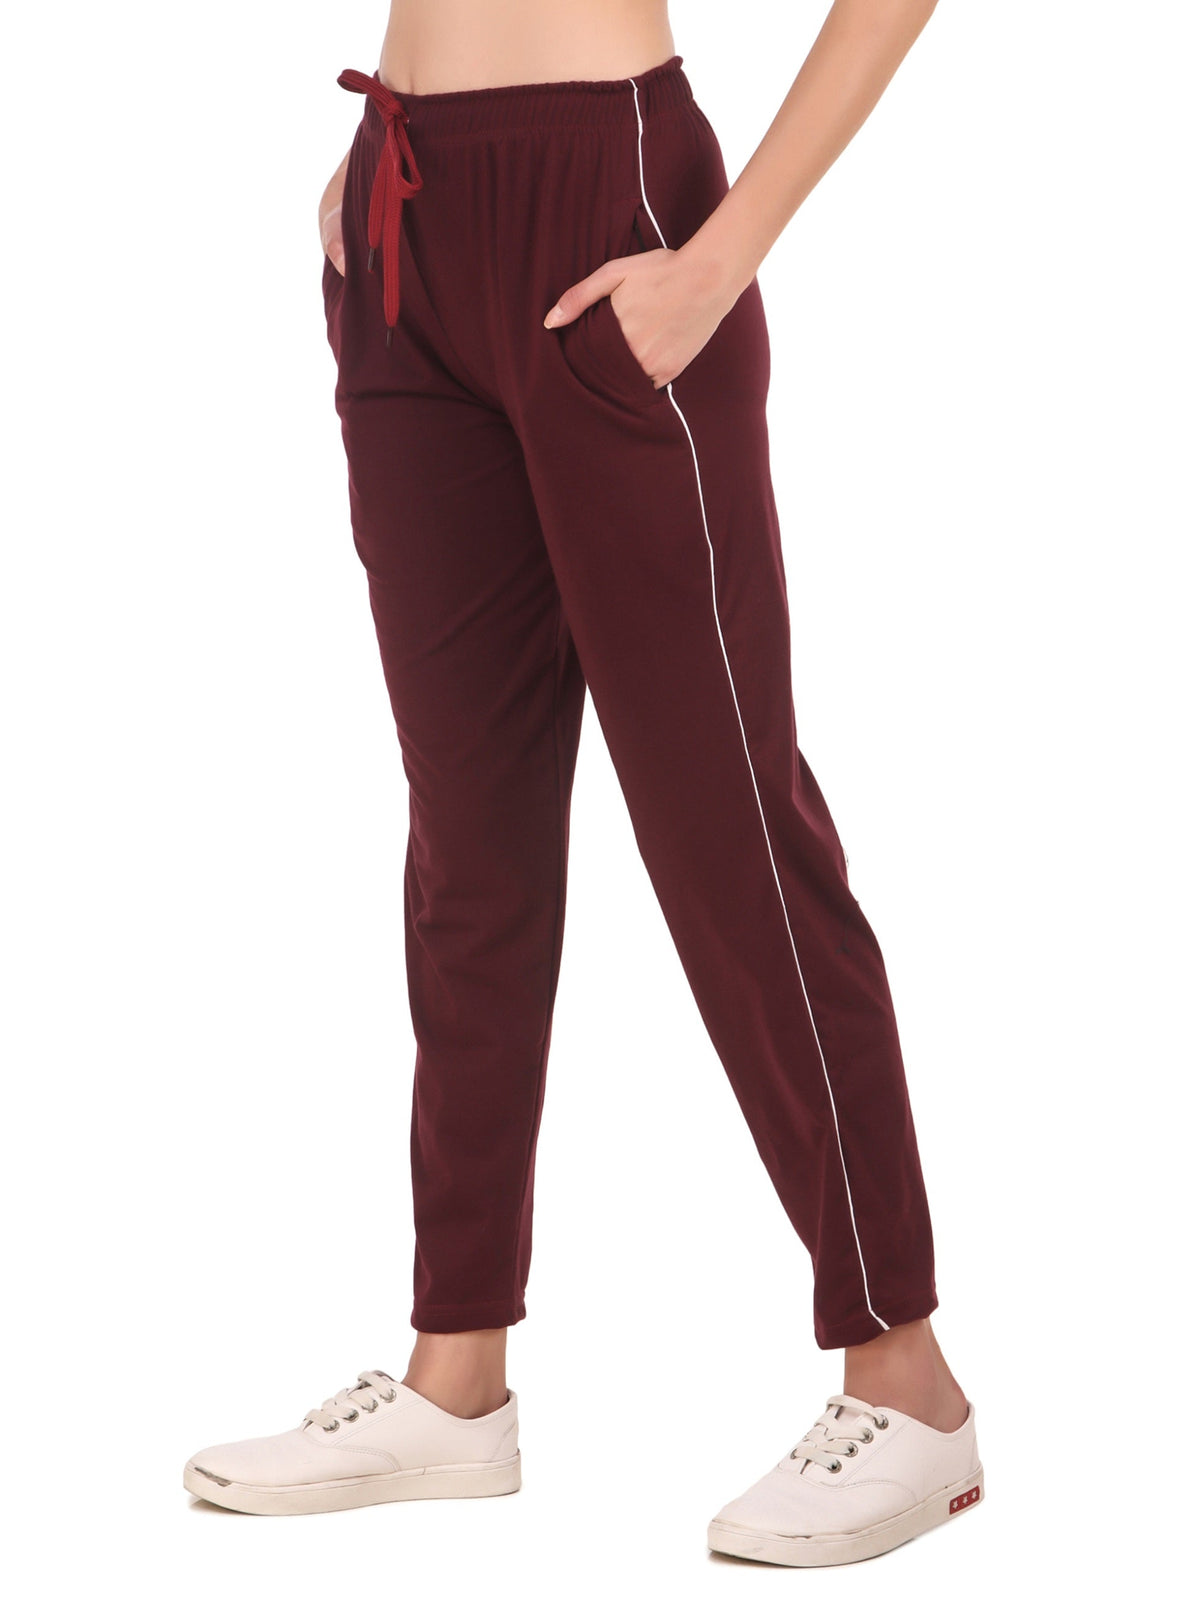 Juliet Womens Track Pants - Get Best Price from Manufacturers & Suppliers  in India